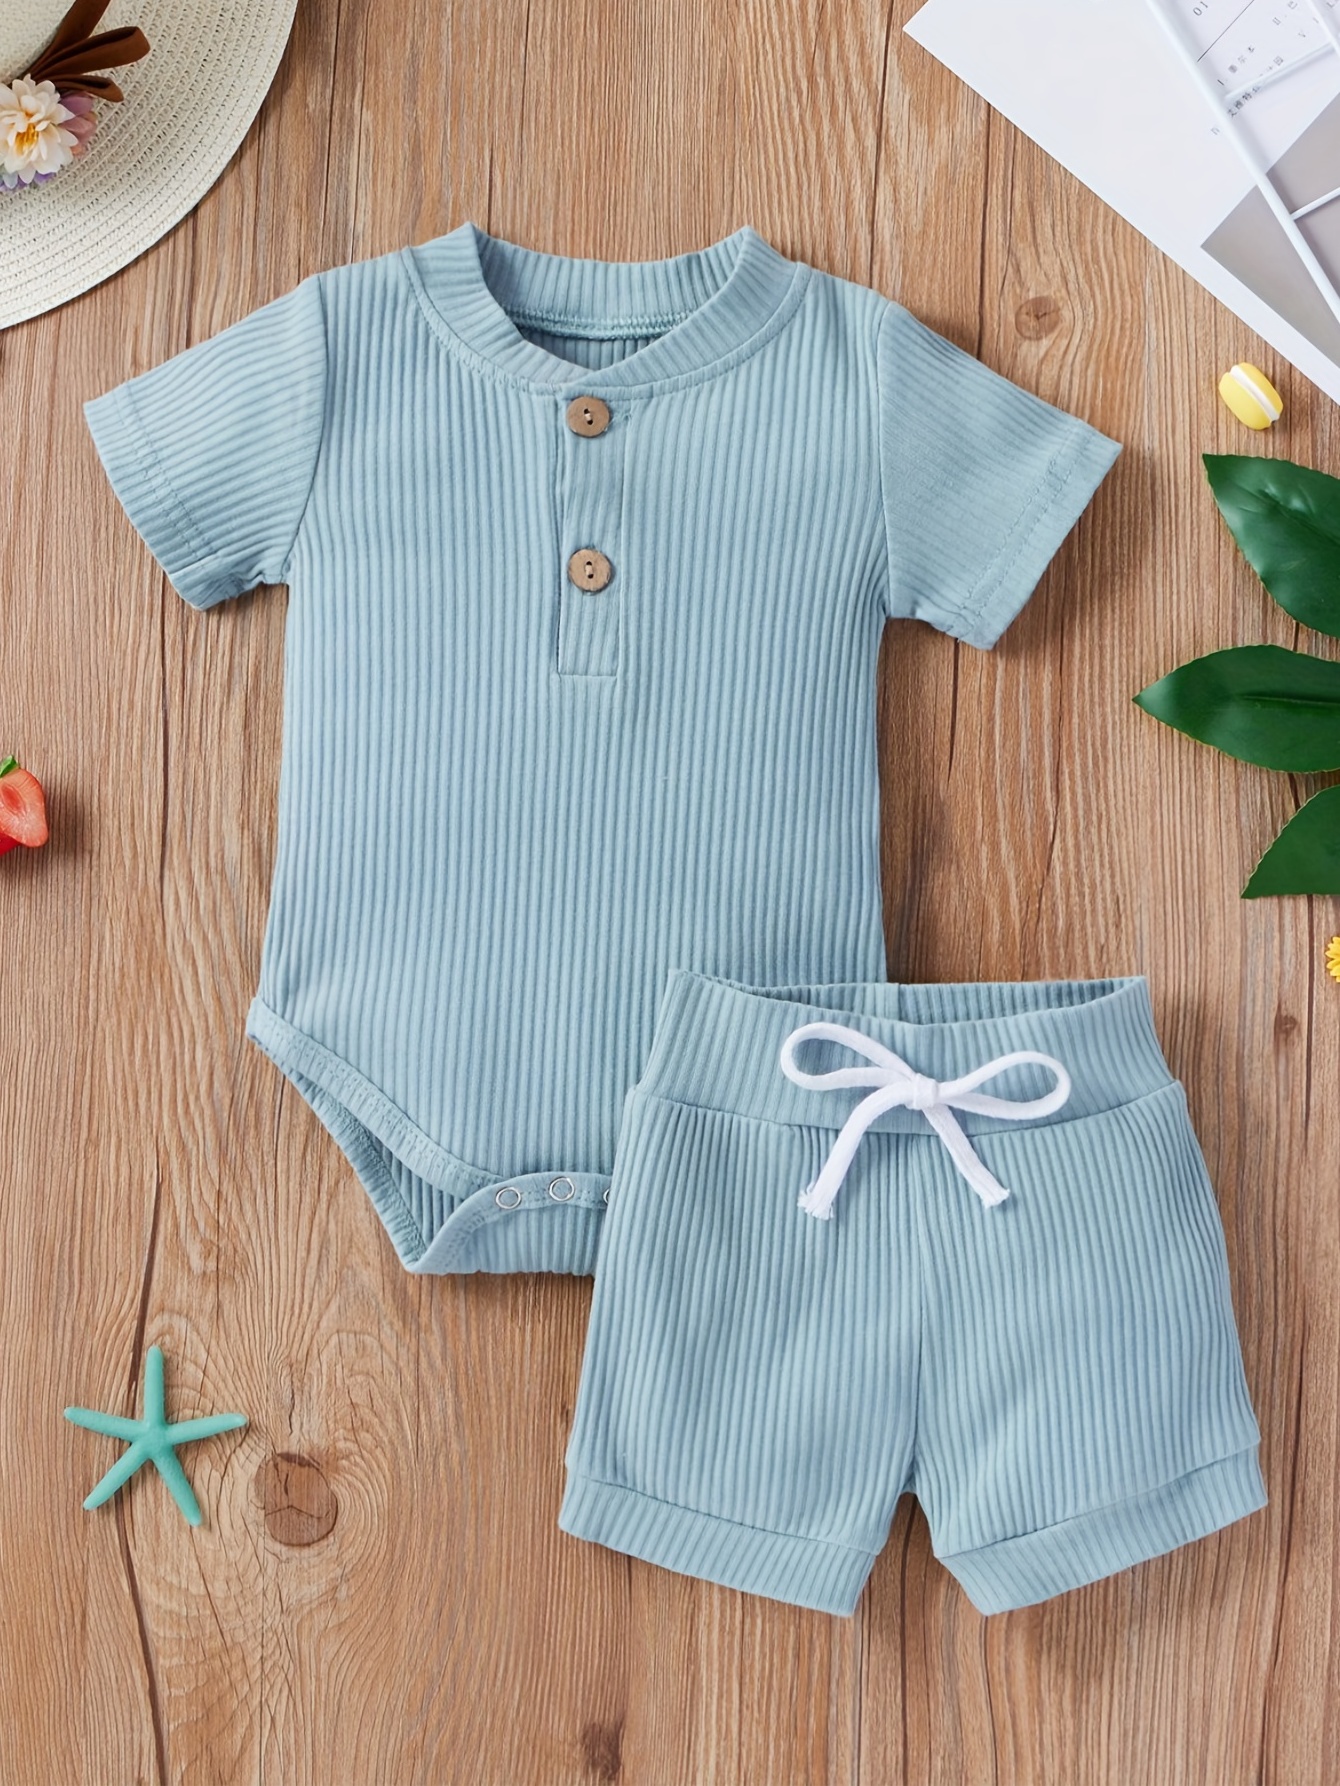  Baby Boy Easter Outfit, 0-3 Months Long Sleeve Letter